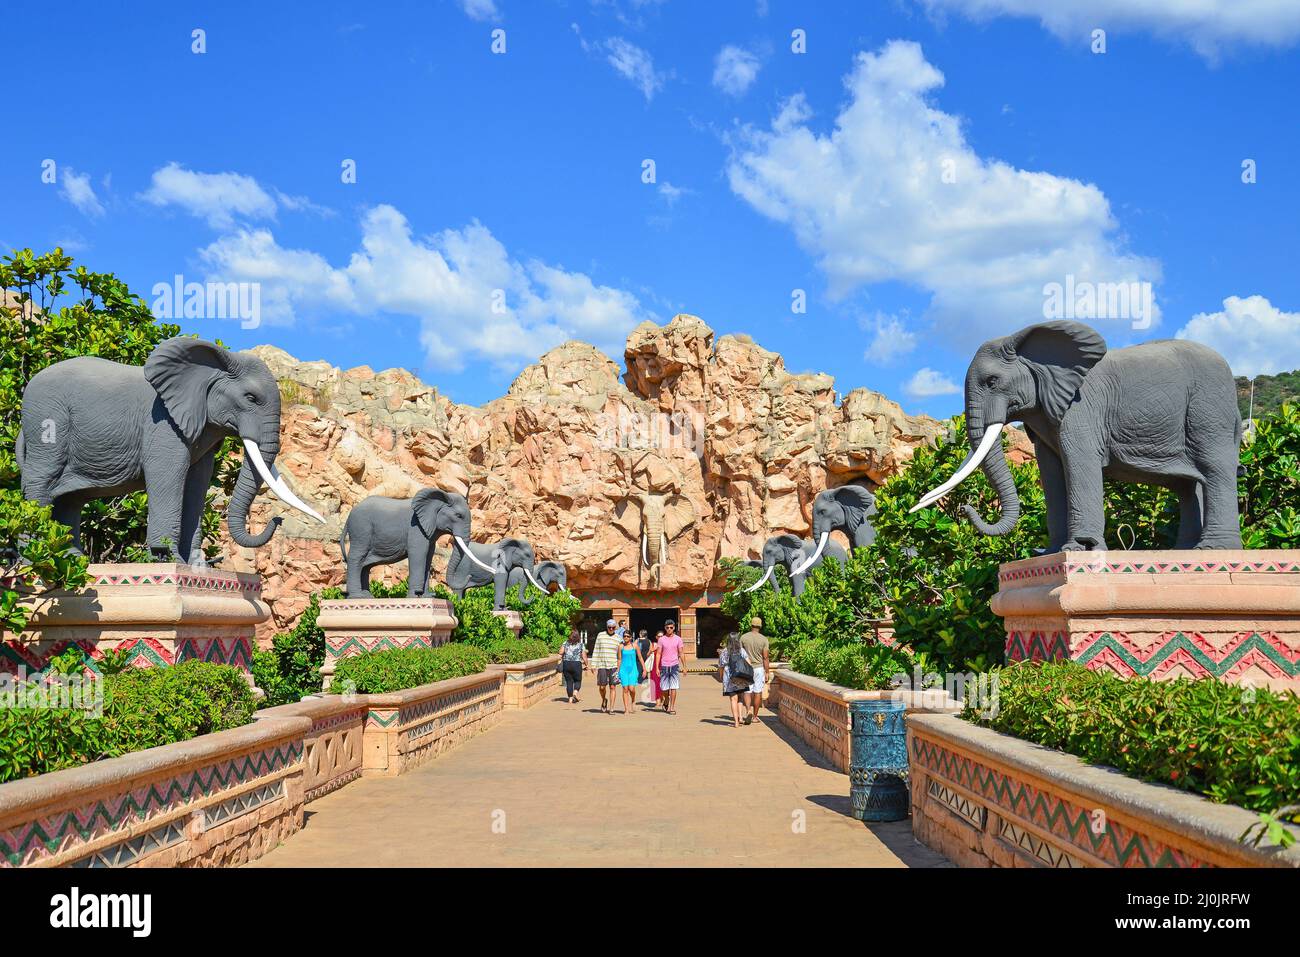 Elephant statues on The Bridge of Time, Valley of Waves, Sun City holiday resort, Pilanesberg, North West Province, South Africa Stock Photo